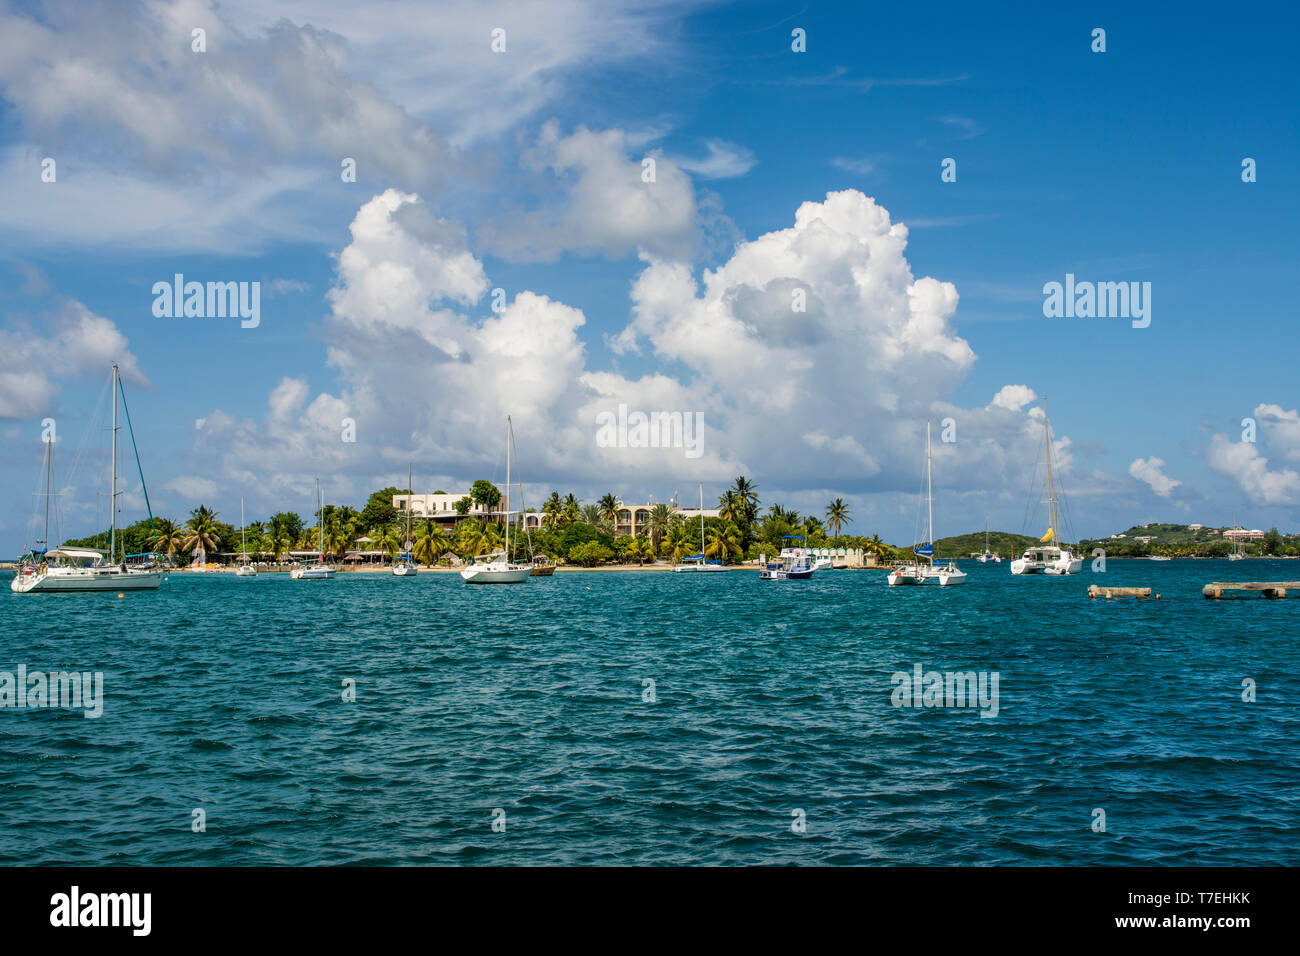 Protestant Cay, Christiansted, St. Croix, US Virgin Islands. Stock Photo